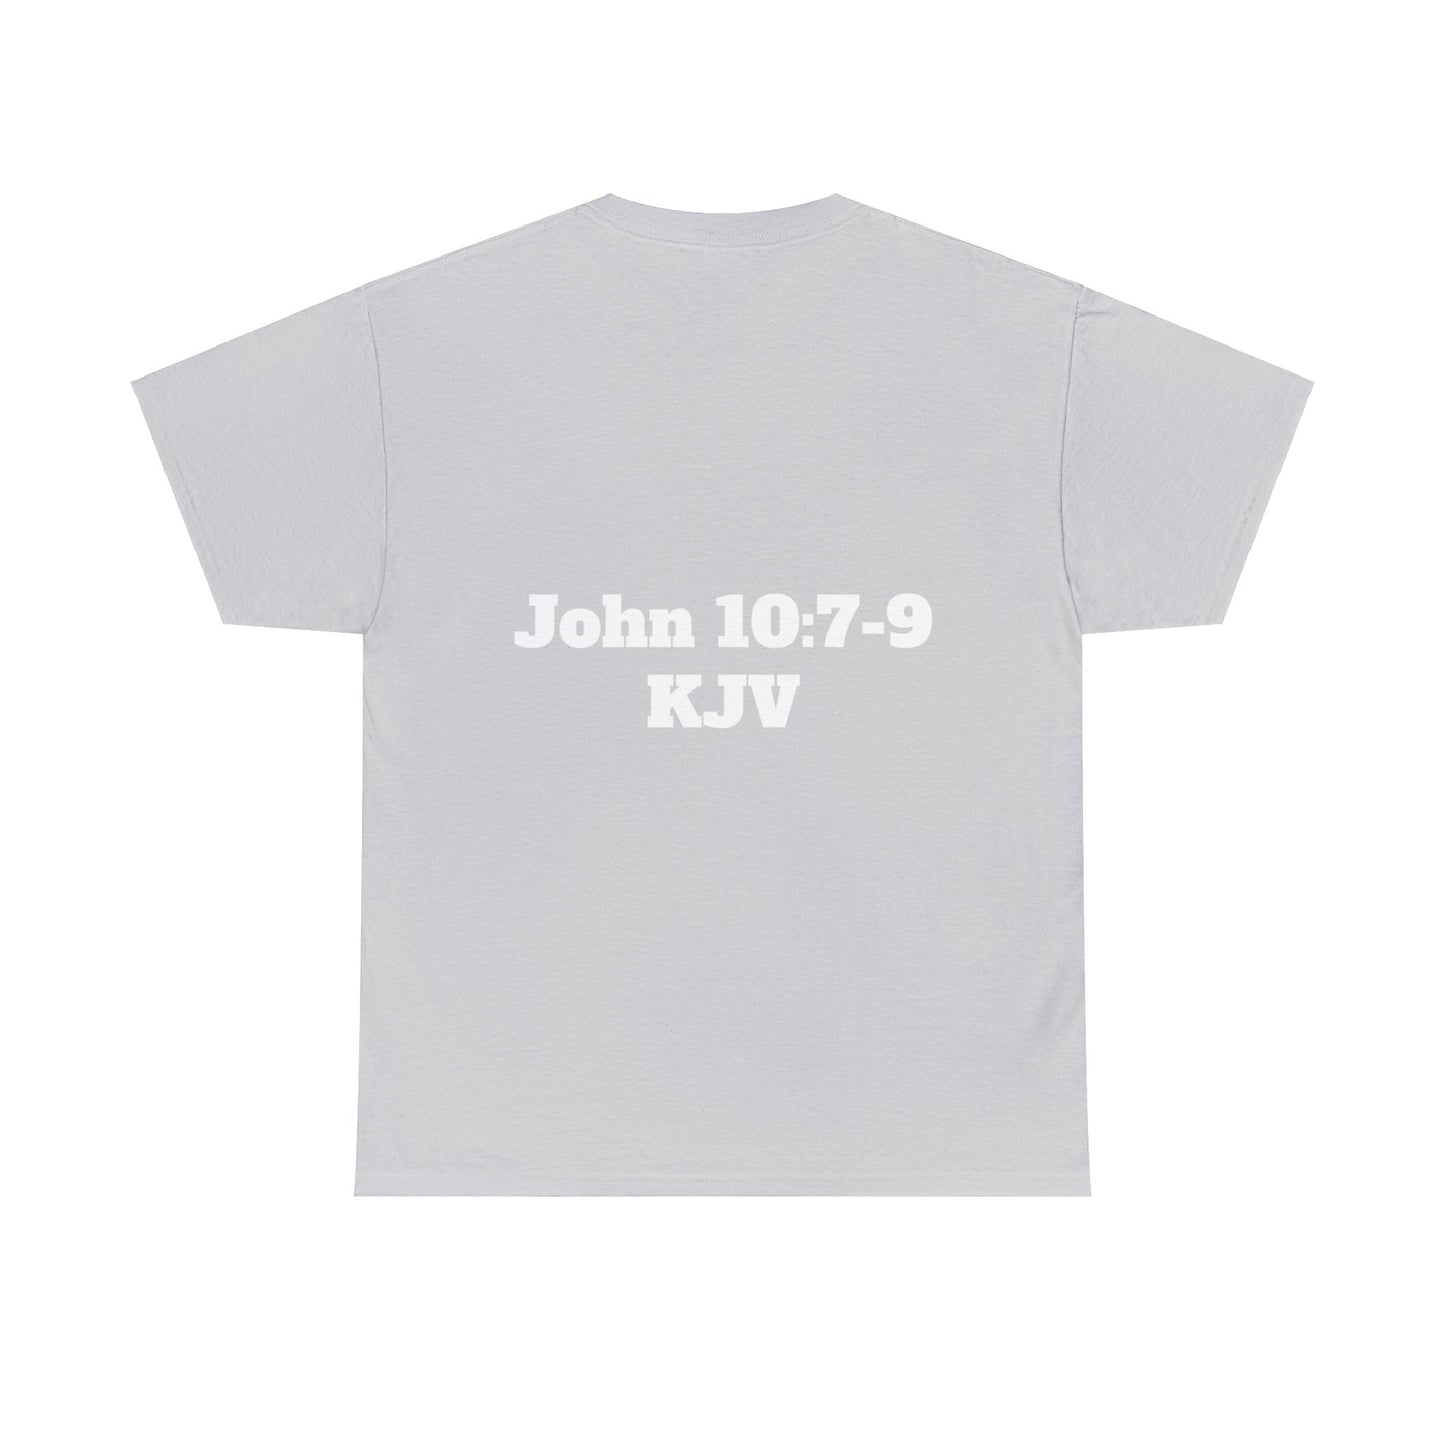 His name is Jesus Christ T-shirt (Black and Gray)